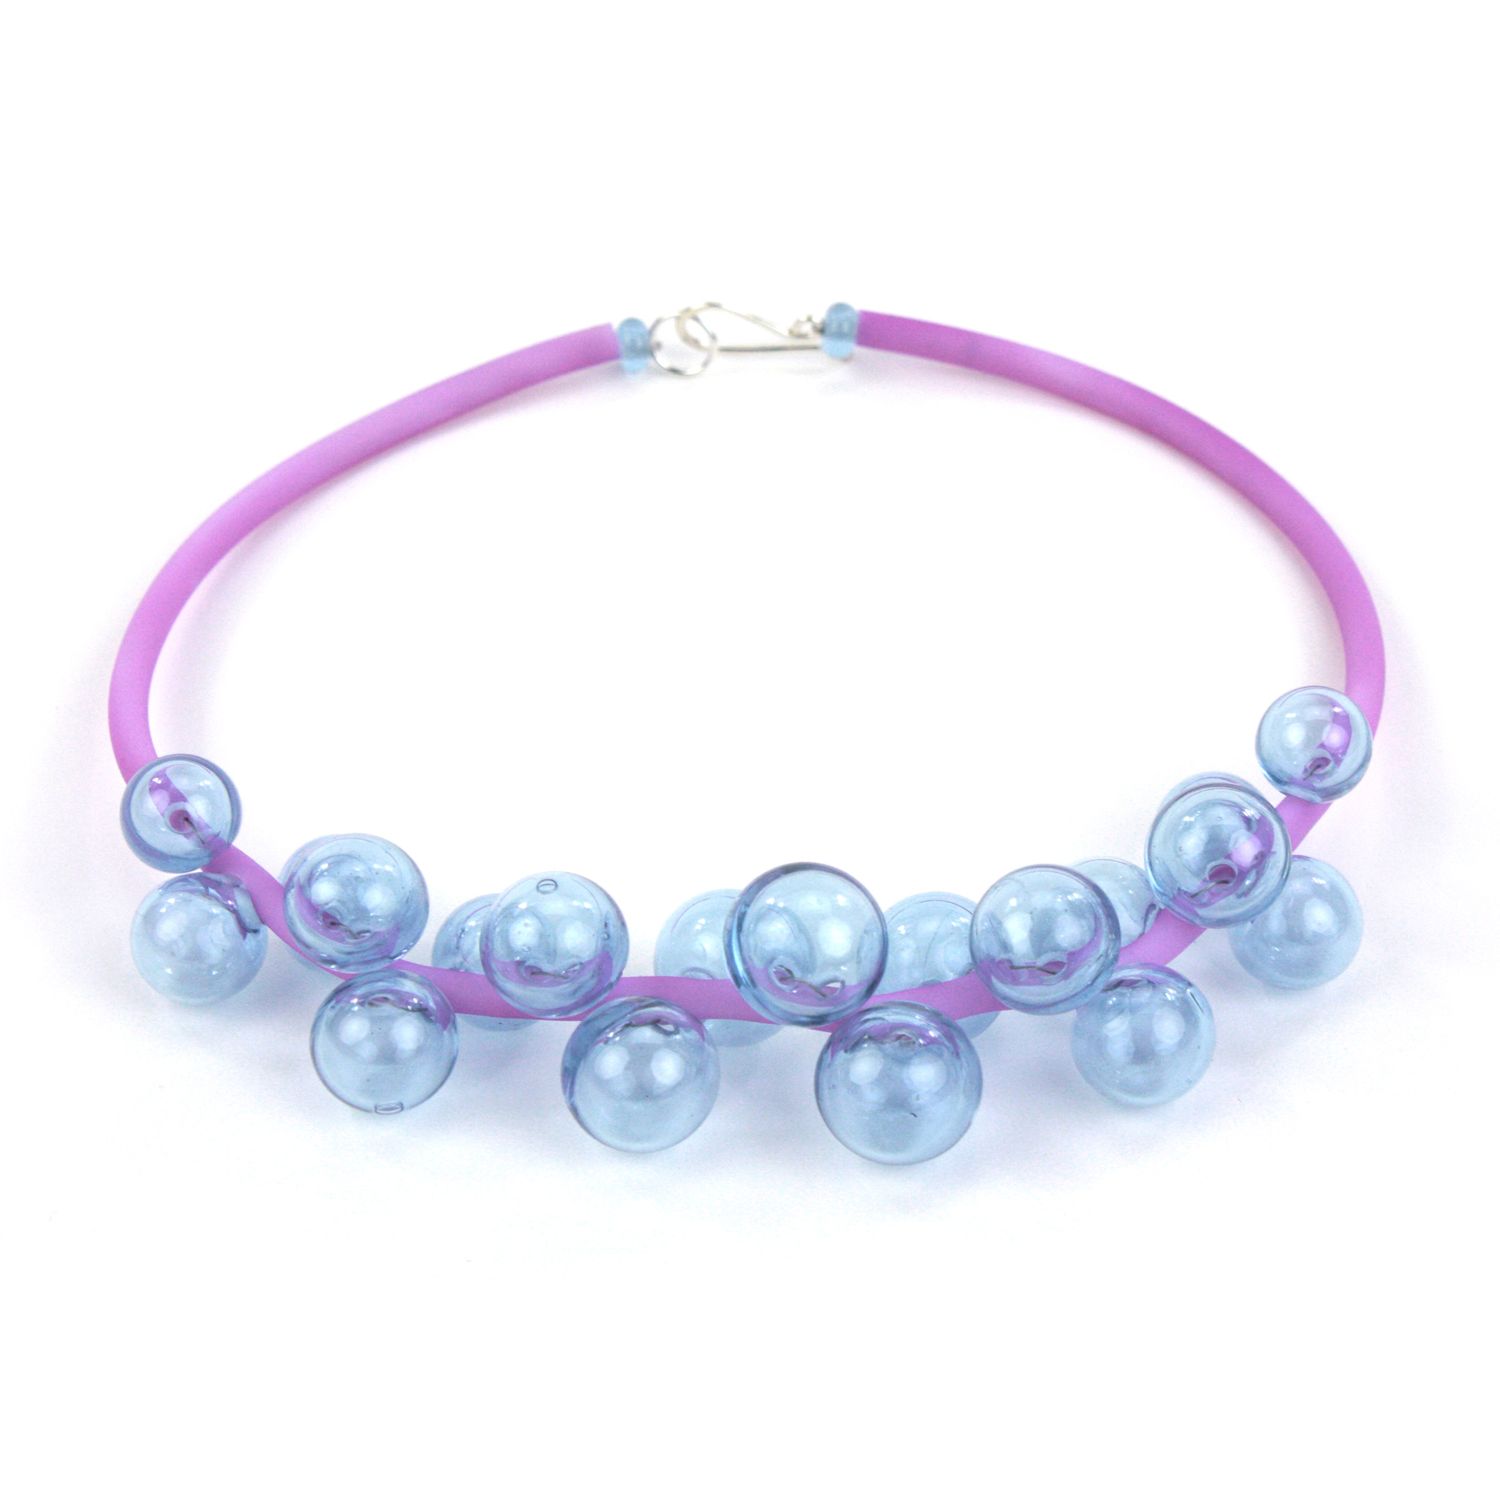 Alicia Niles: Chroma Bolla Necklace – Blue/Purple changing colour Product Image 2 of 6